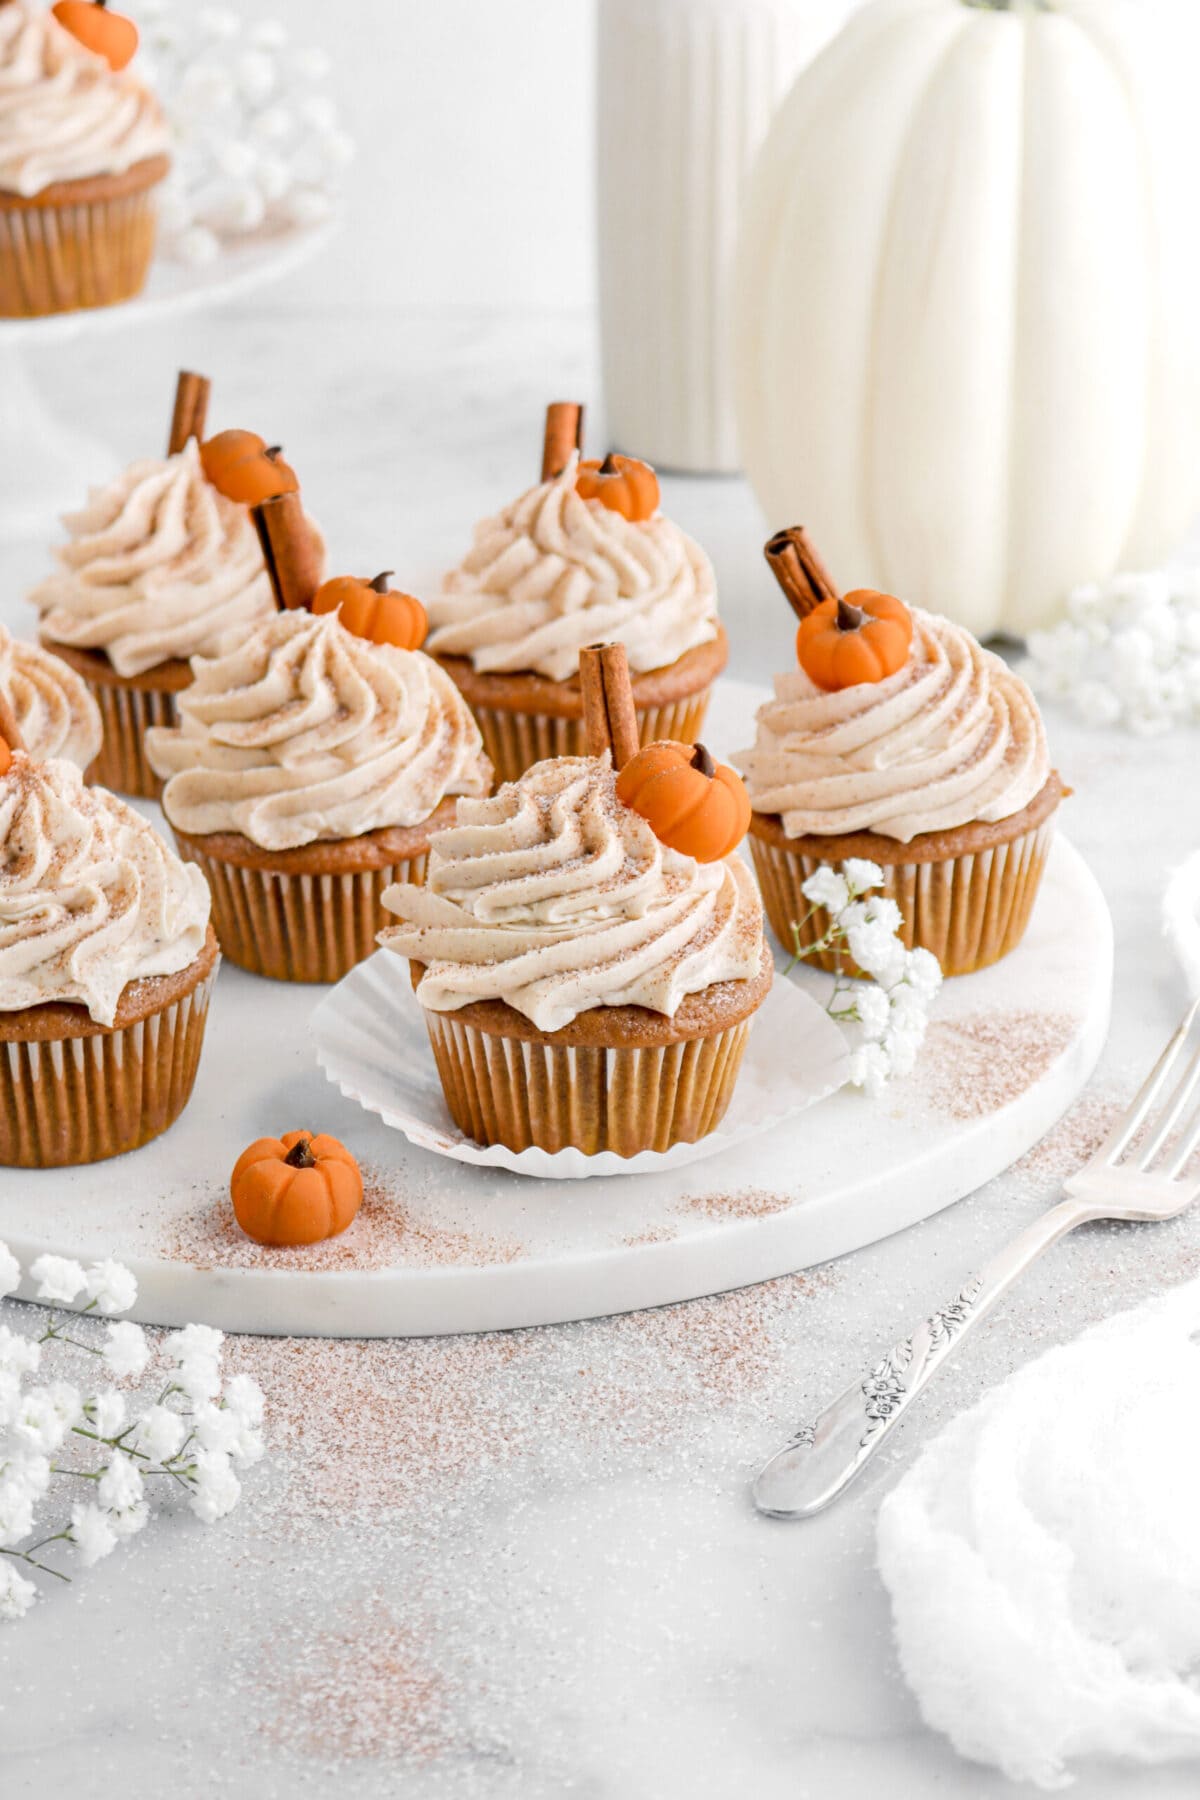 angled image of pumpkin cupcakes on marble board with fondant pumpkins, cinnamon sticks, and spiced sugar on top with white flowers and a fork beside.